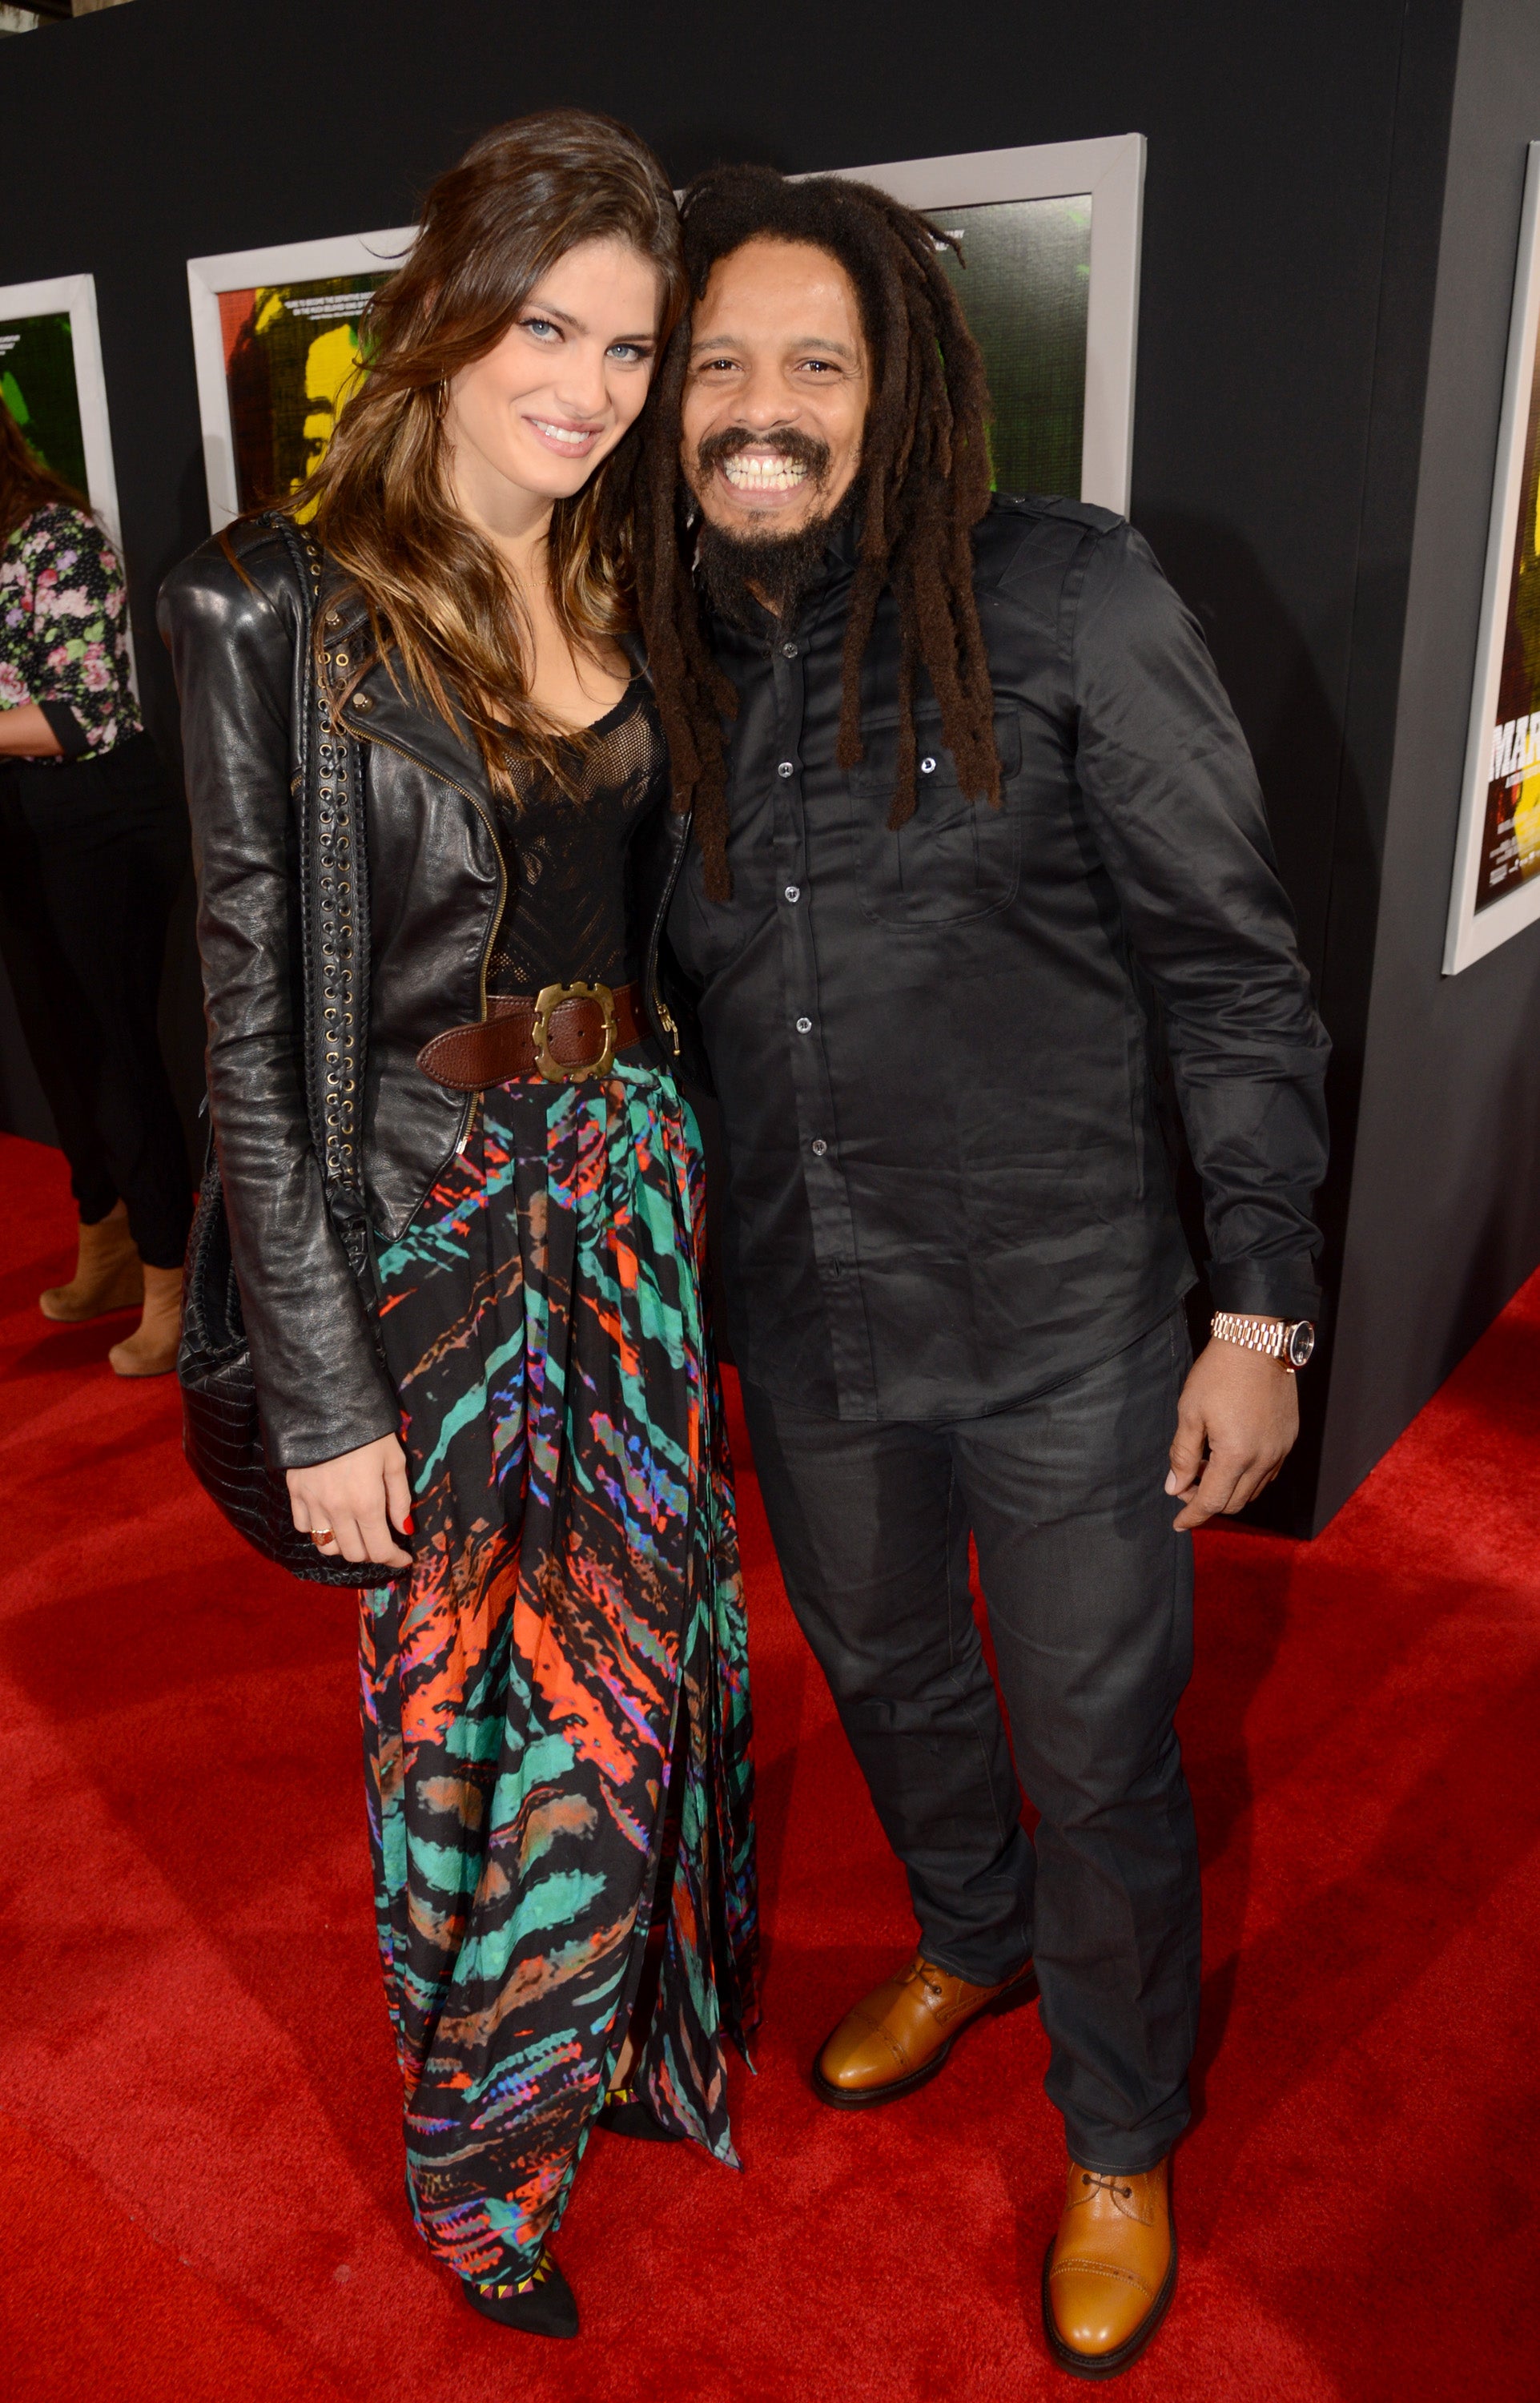 Who Is Rohan Marley Marrying?